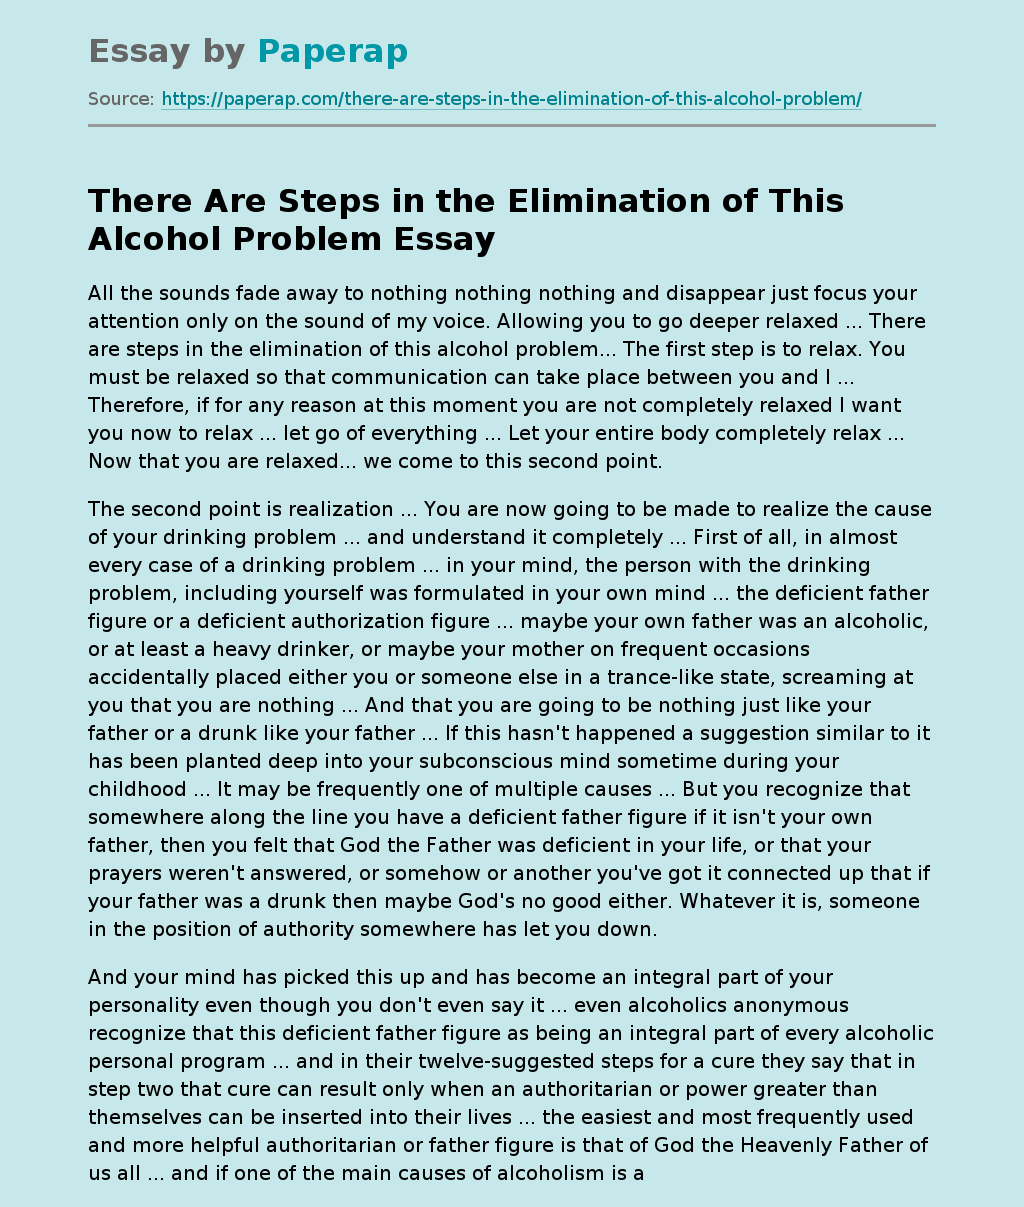 There Are Steps in the Elimination of This Alcohol Problem